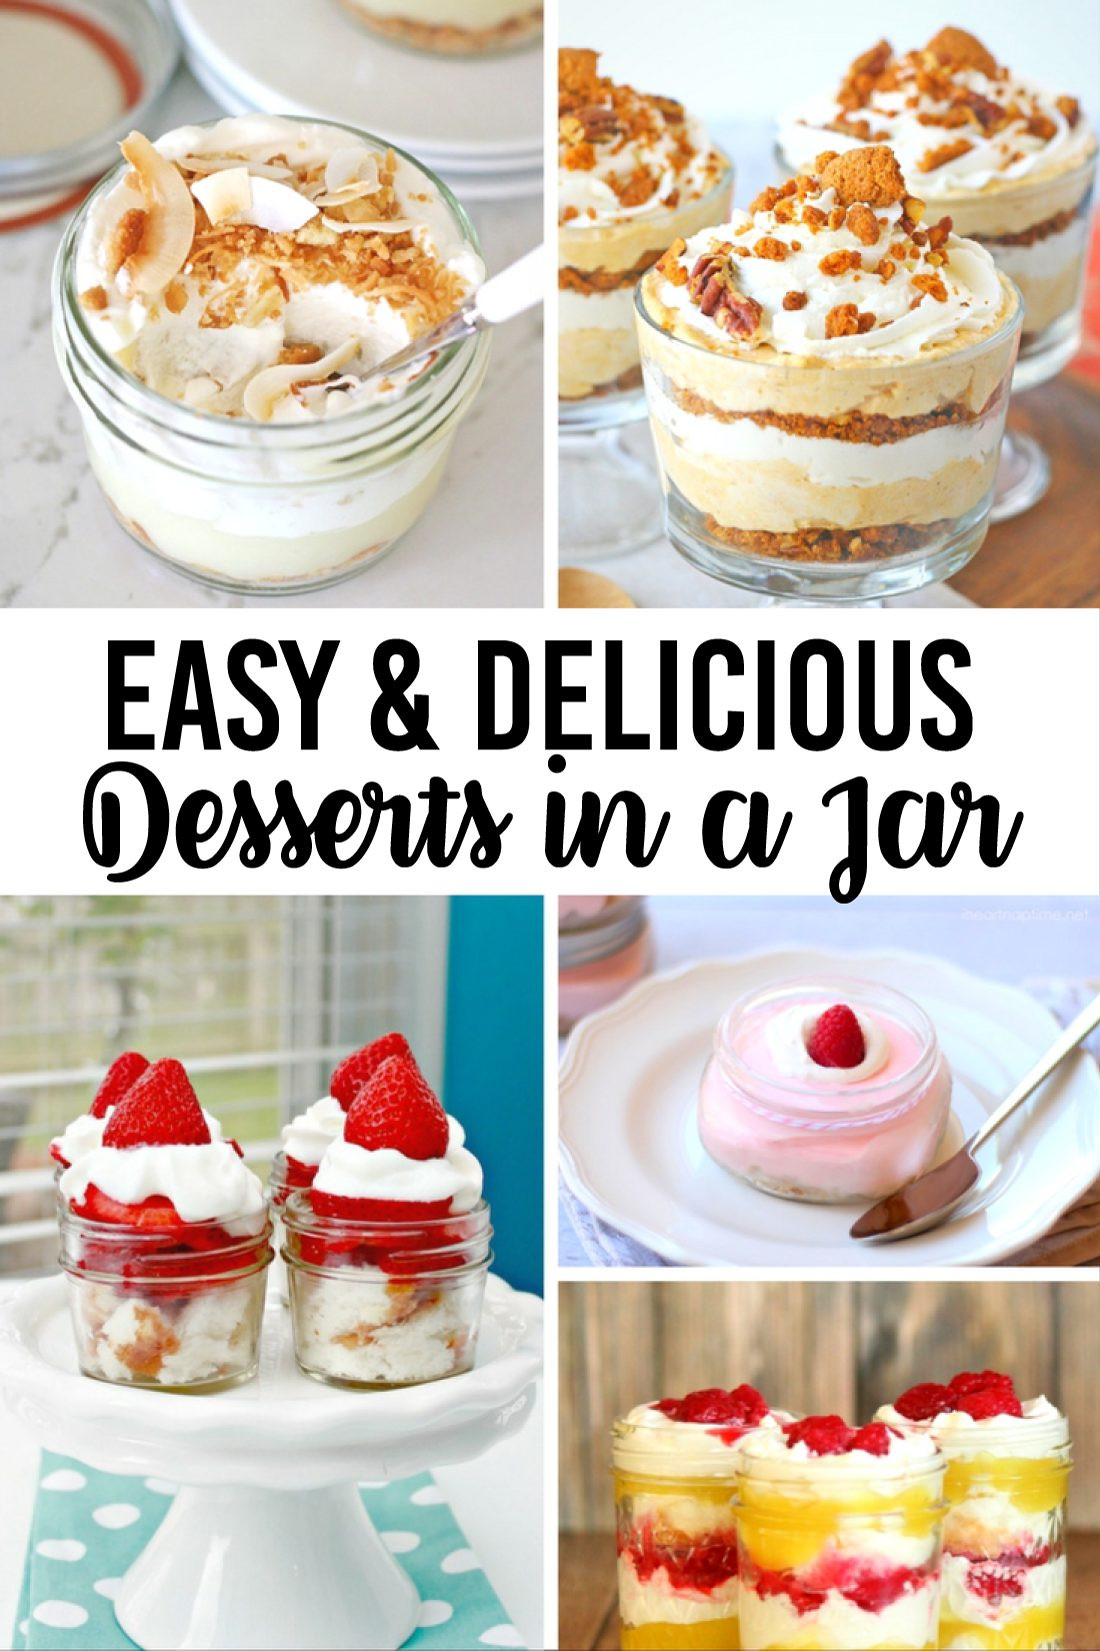 Simple Dessert Recipes
 20 Easy and Delicious Desserts in a Jar